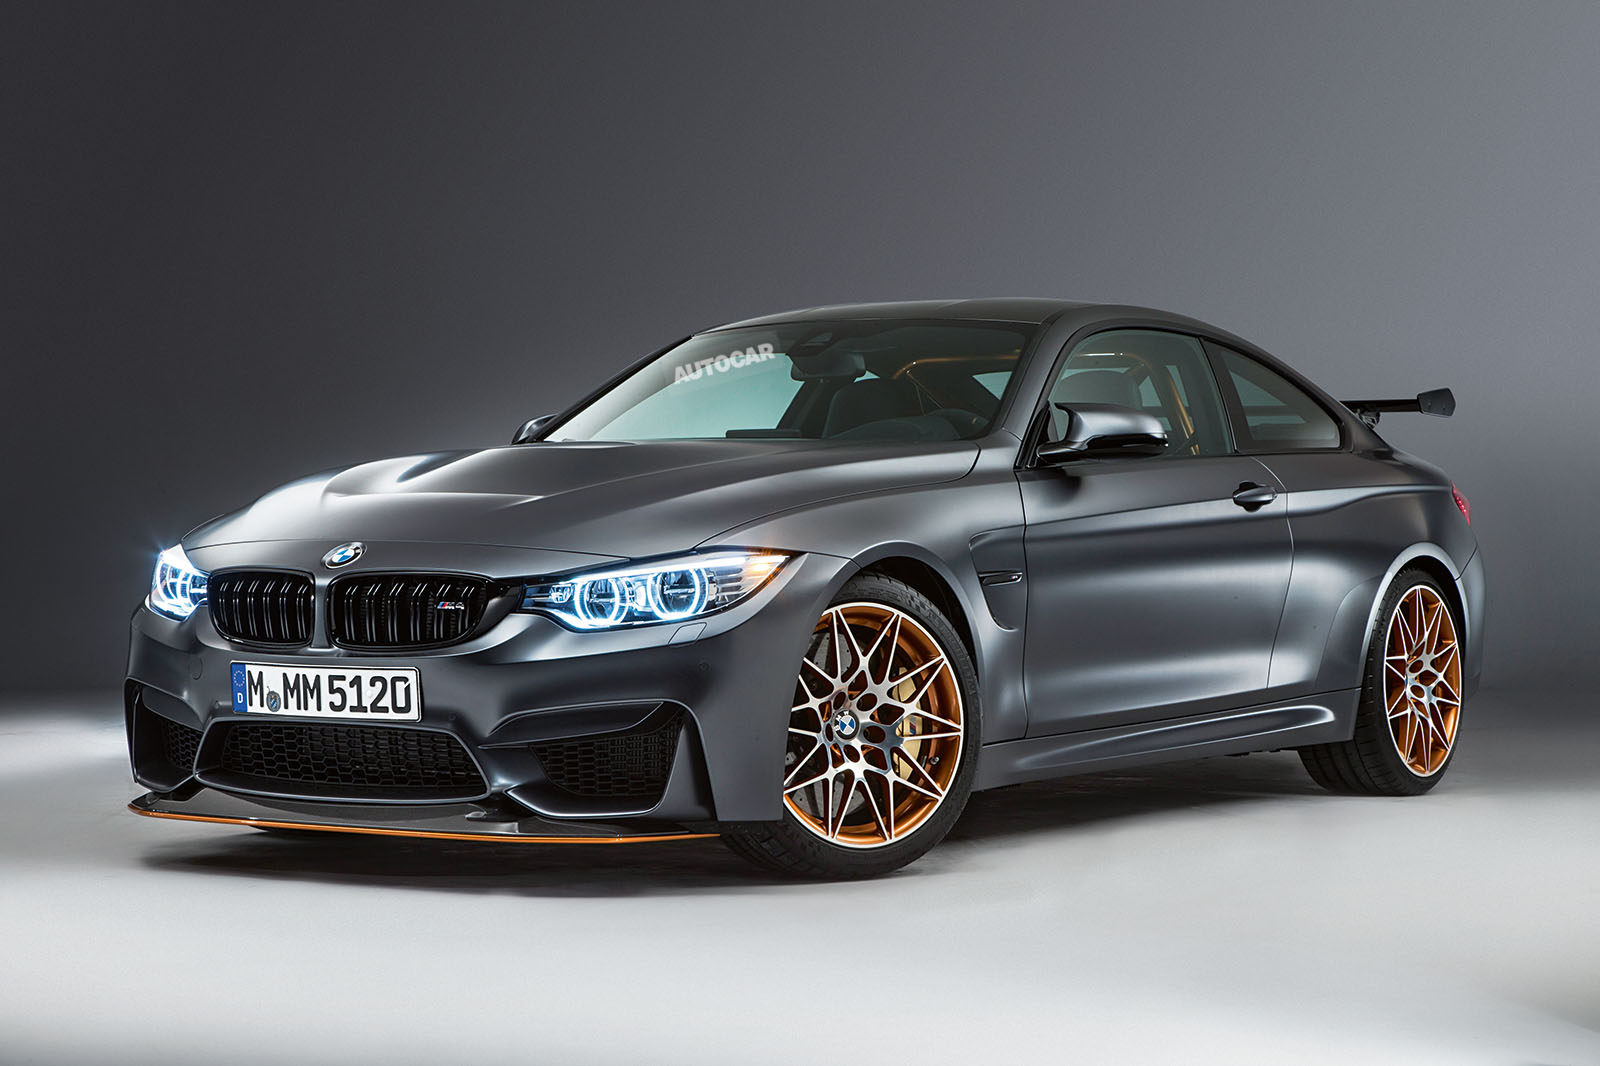 Exclusive new pics and video of the new 493bhp BMW M4 GTS Autocar